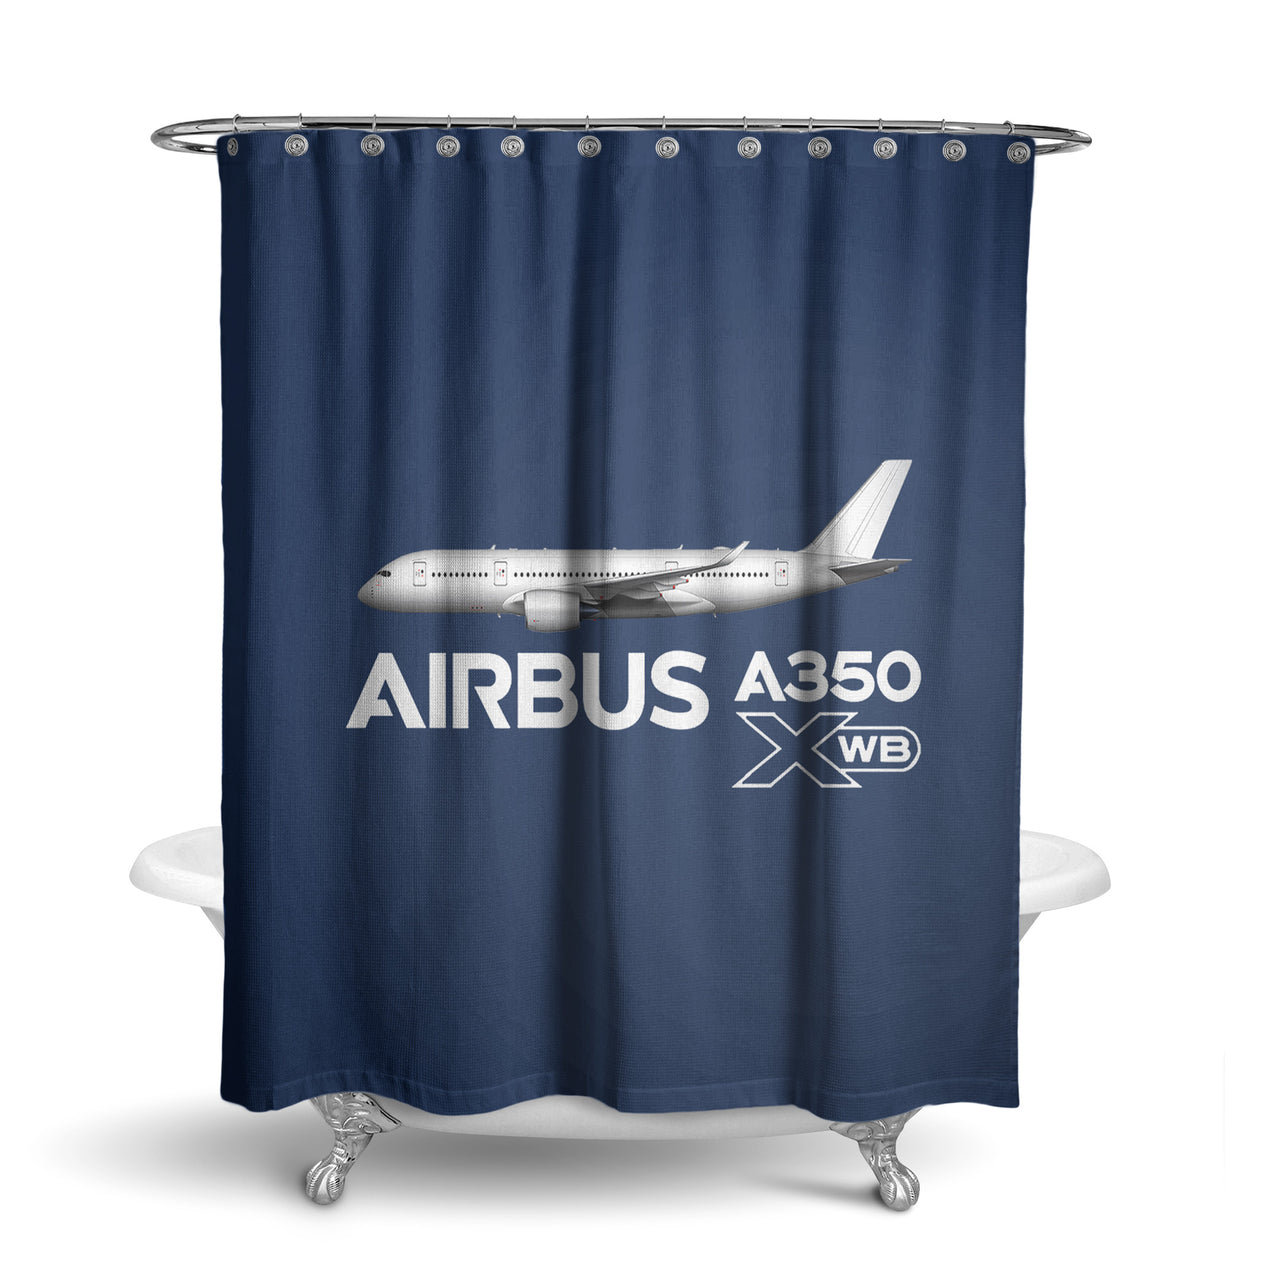 The Airbus A350 WXB Designed Shower Curtains